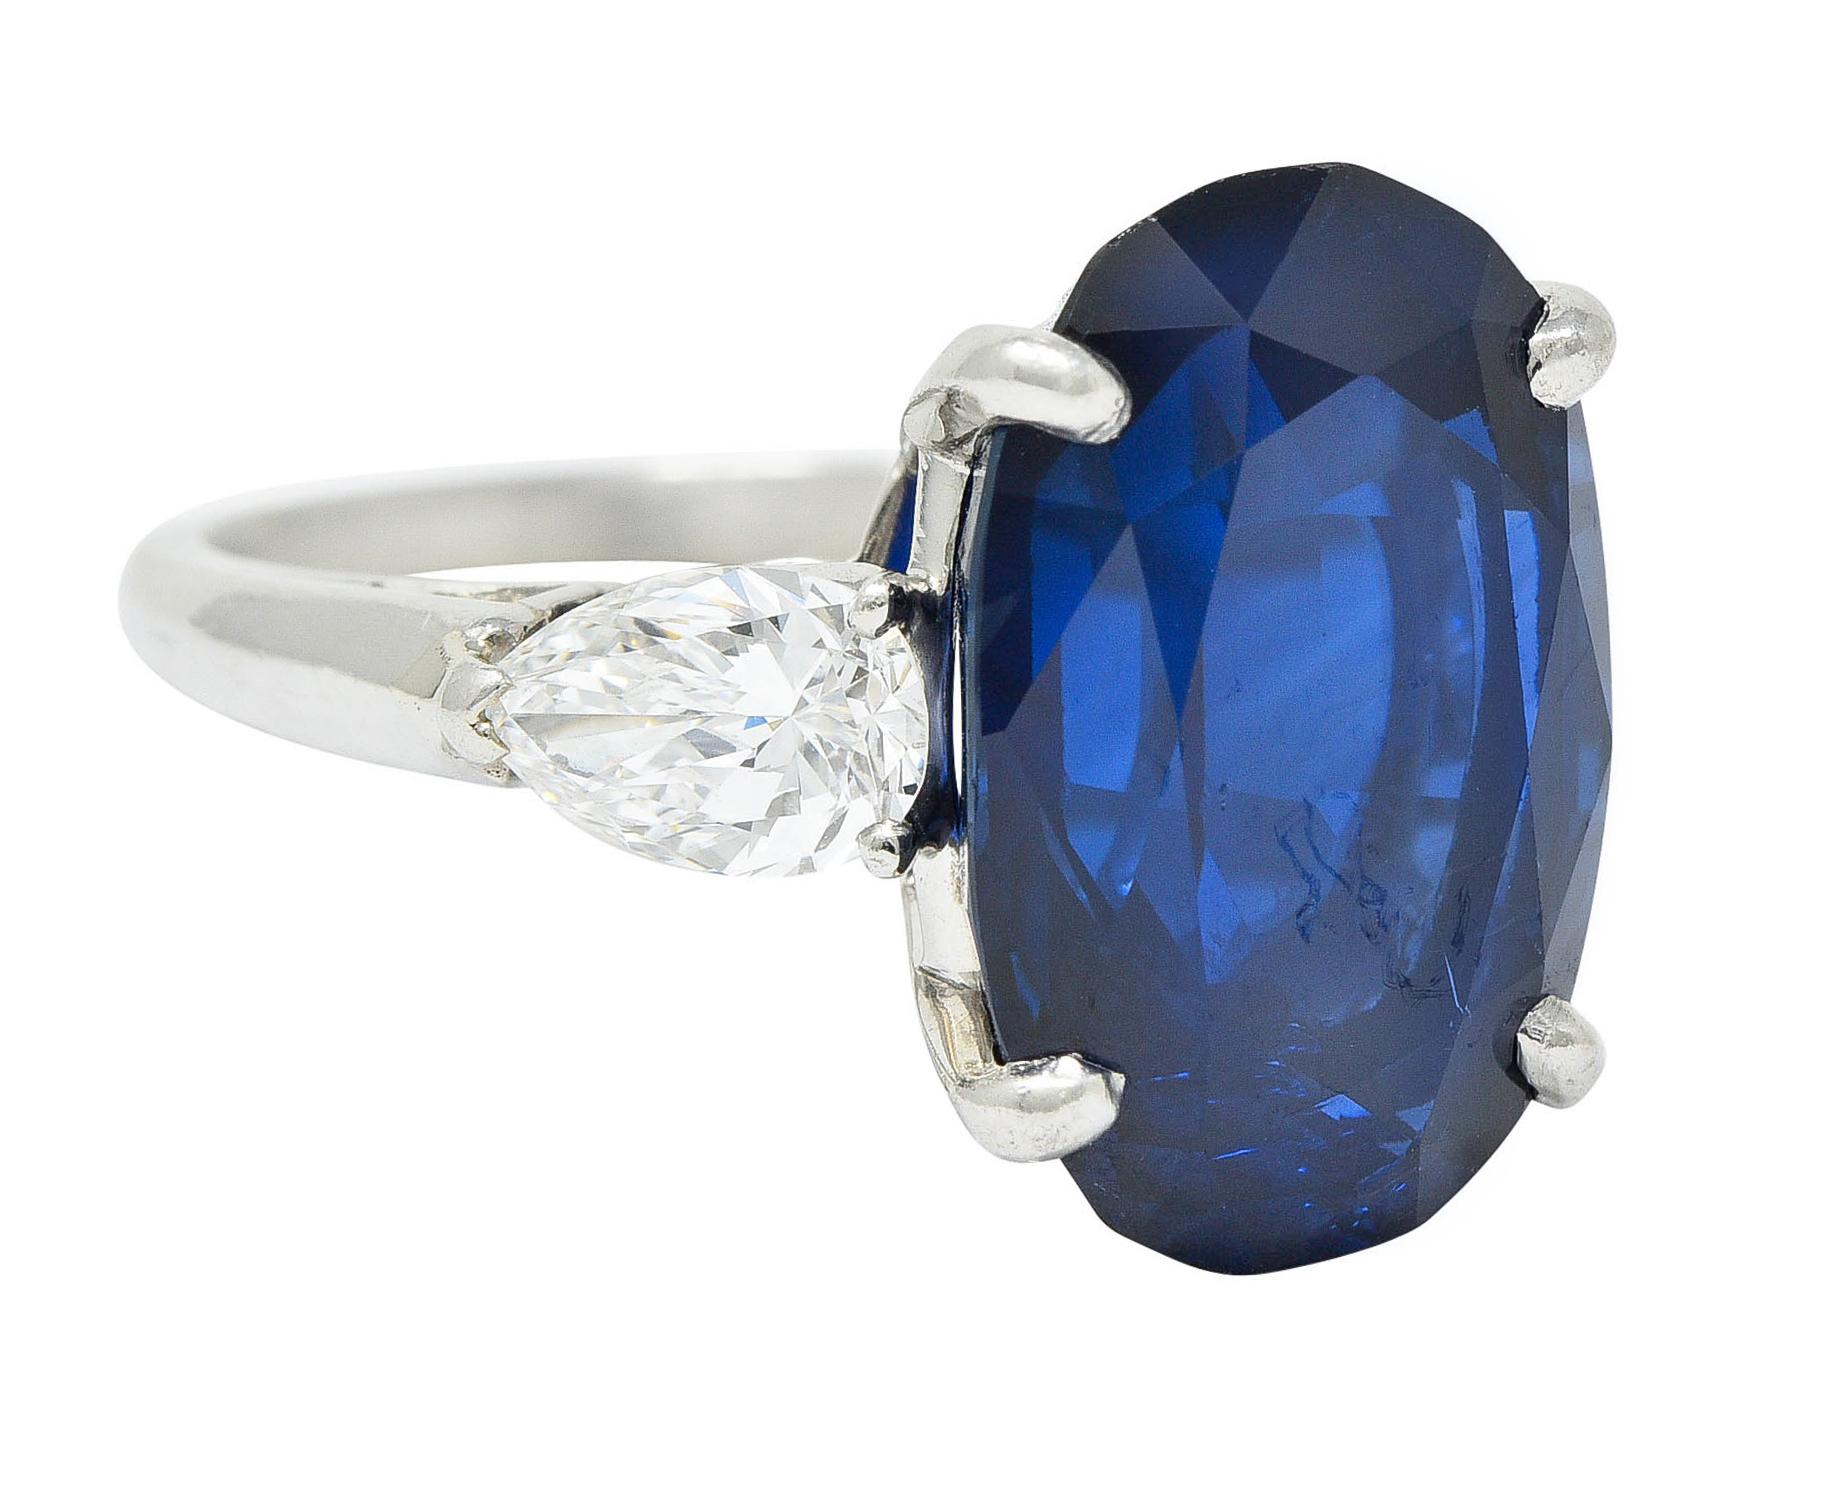 Centering an oval cut sapphire weighing approximately 10.70 carats

Medium dark royal blue with no indications of heat - Thai in origin

Basket set and flanked by two pear cut diamonds

Weighing in total approximately 1.00 carat with F/G color and